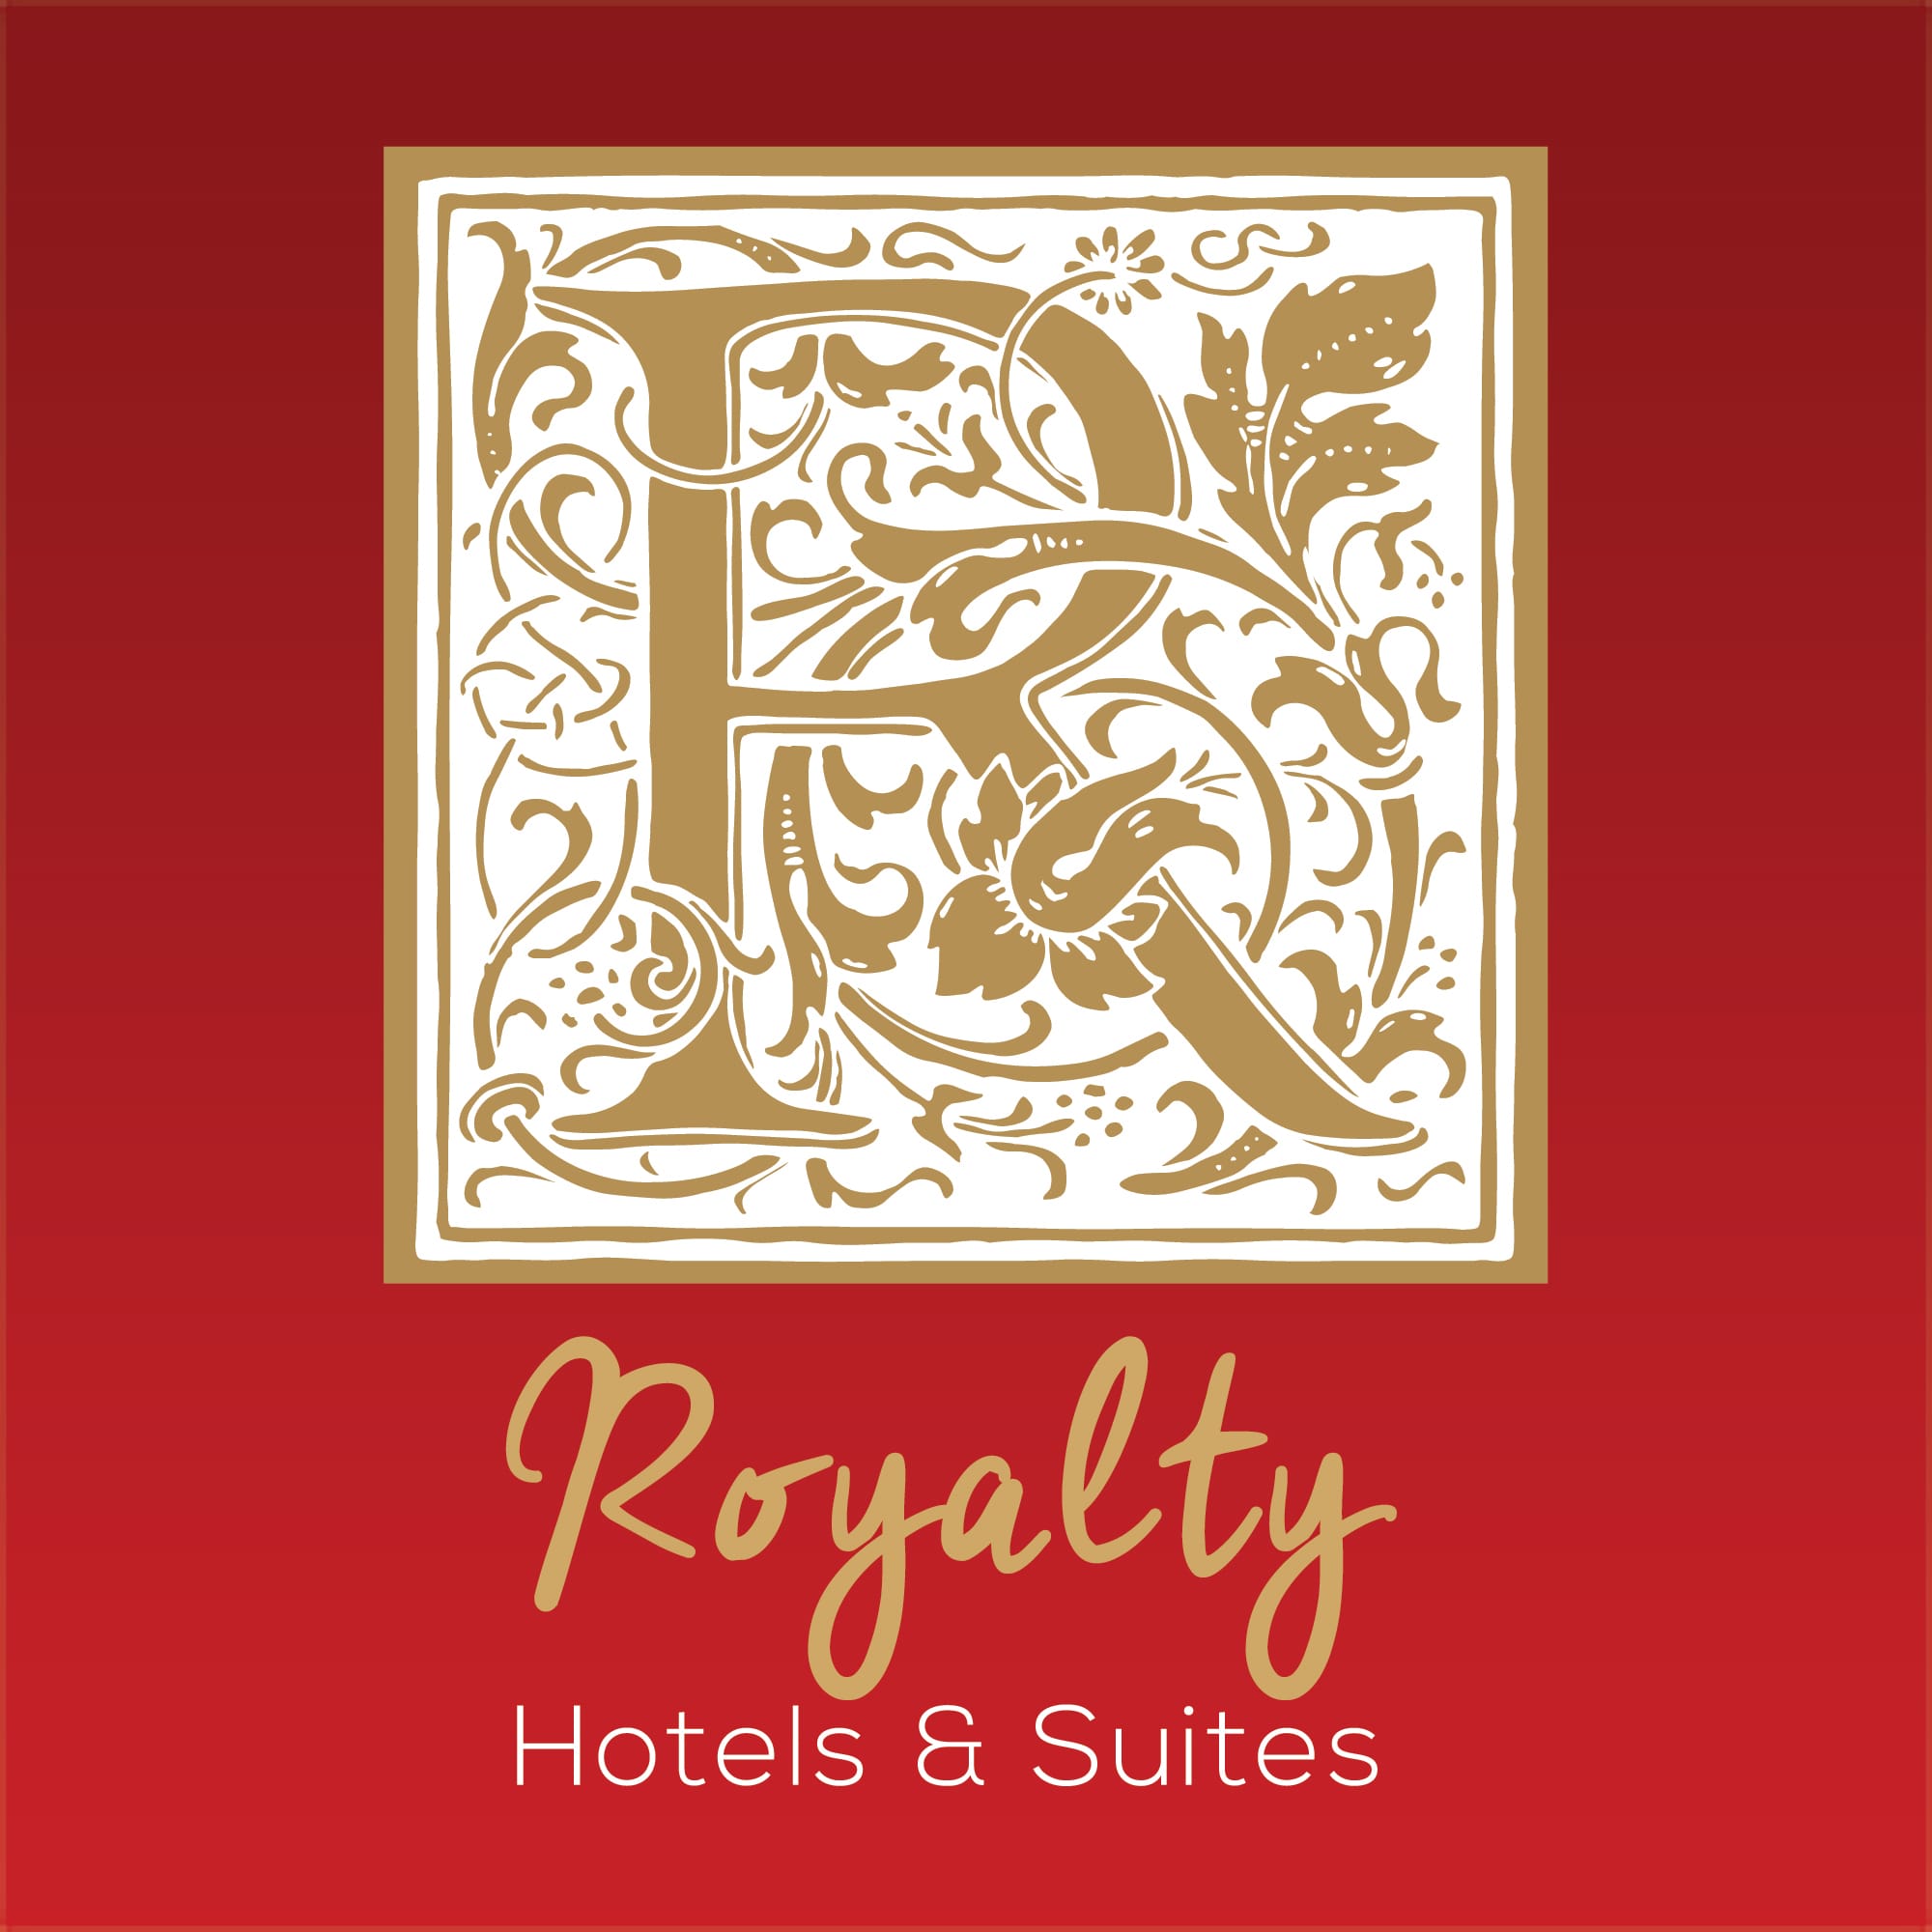 Royalty Hotels & Suites